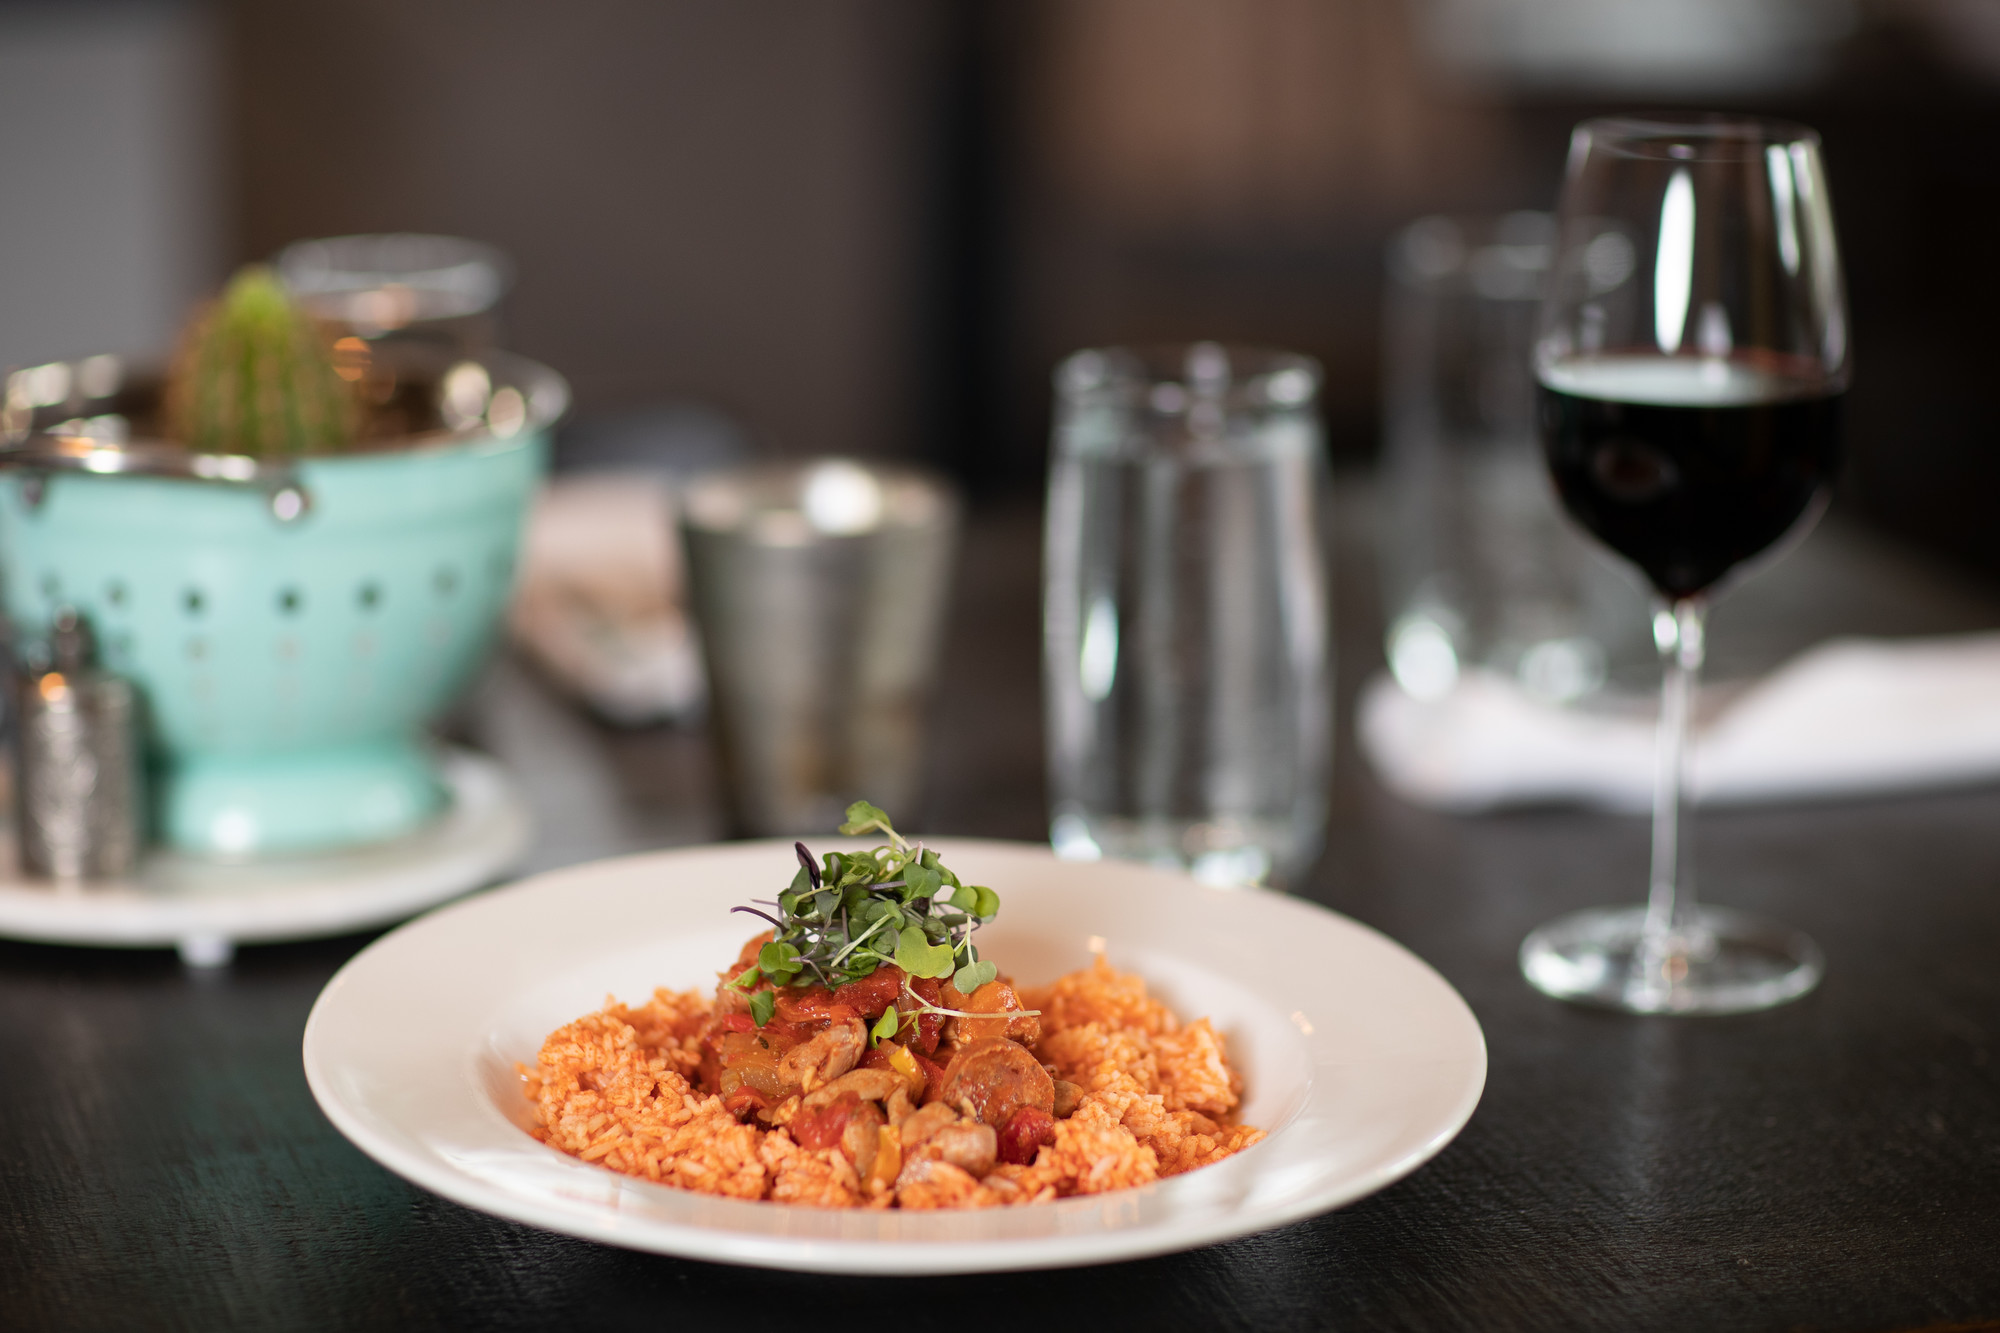 A plate of rice and jambalaya and glass of wine on a modern dining table.